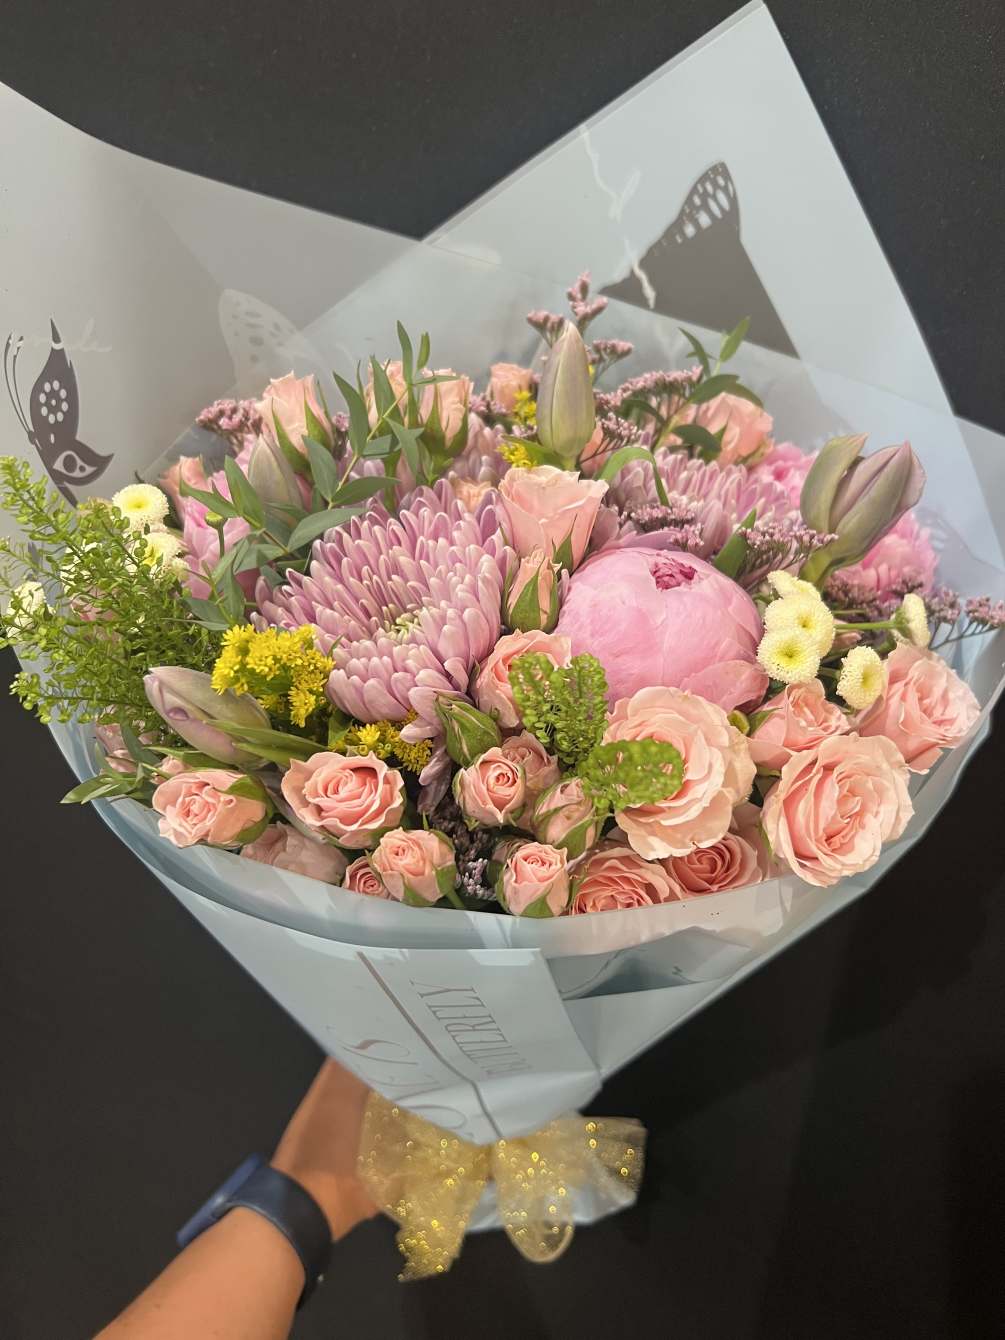 Beautiful bouquet of flowers peonies,tulips,spray roses and more mix of flowers to